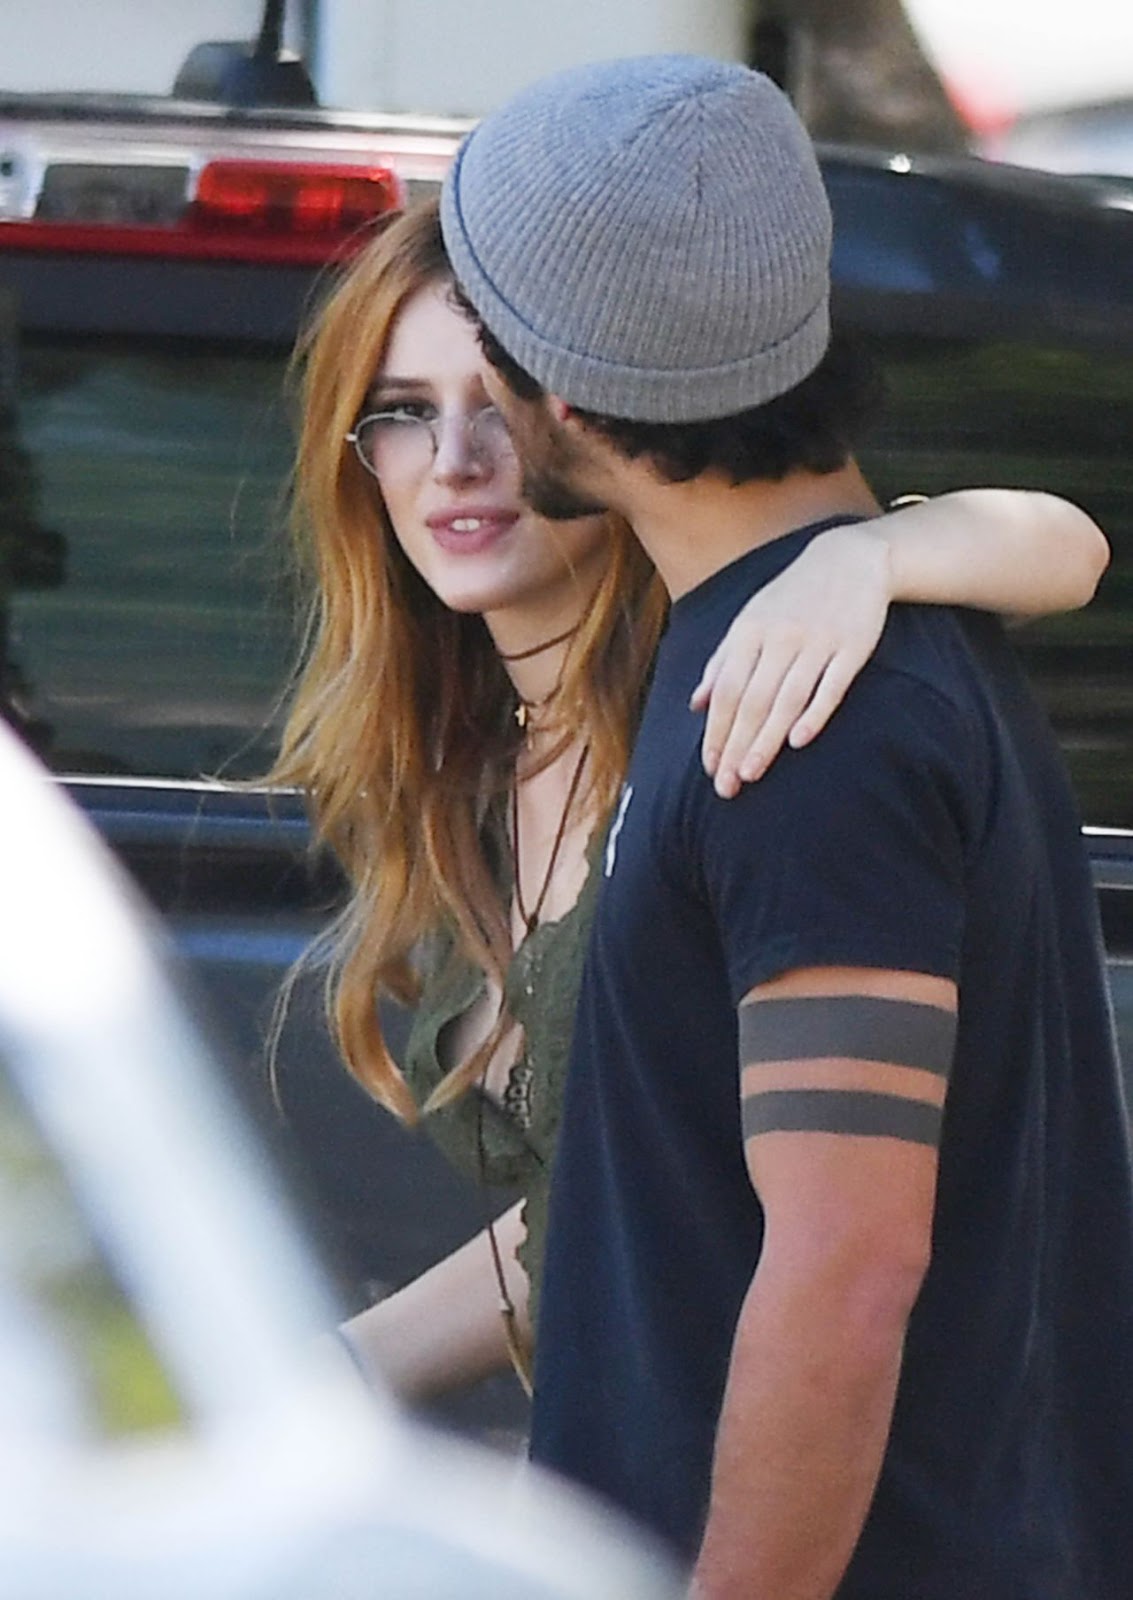 Bella+Thorne+and+her+new+boyfriend+Tyler+Posey+Kissing+at+